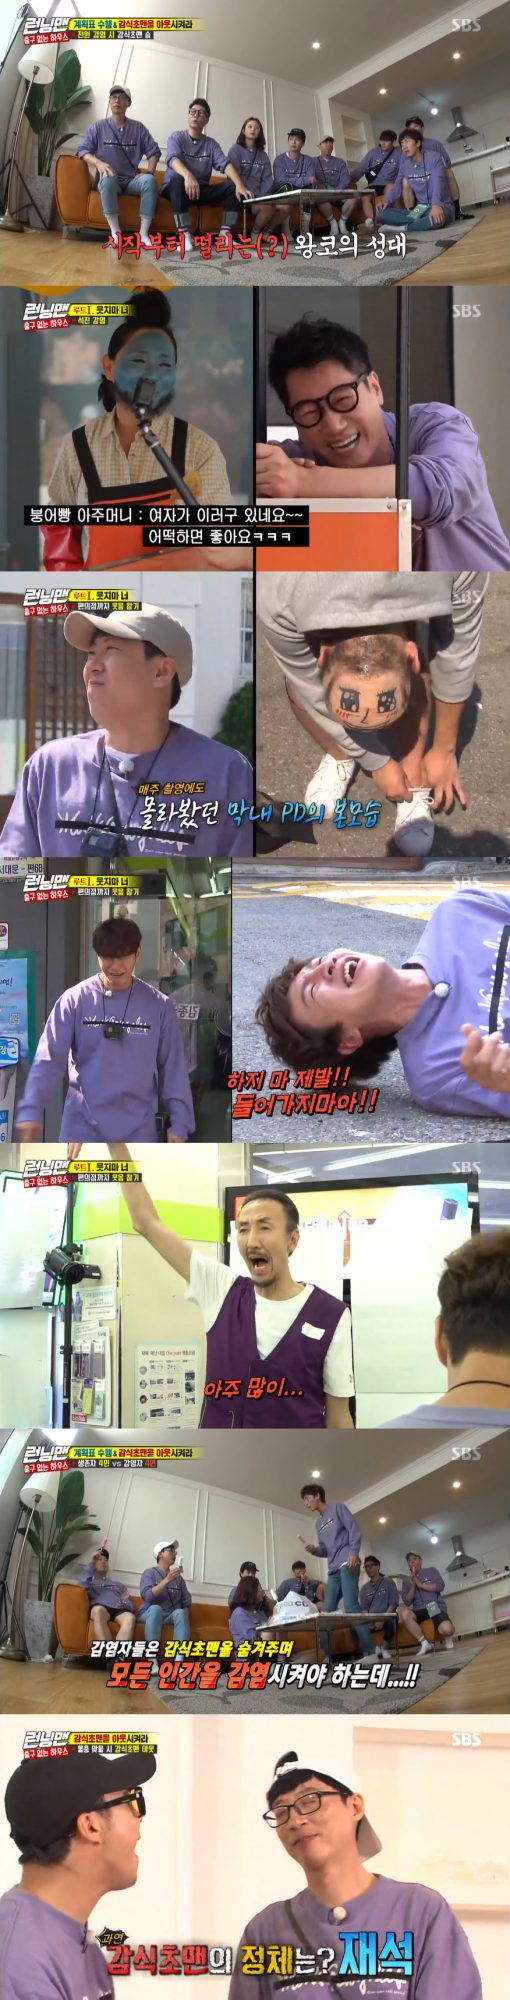 Kim Jong-kook won the final with Haha in SBS Running Man by choosing Yoo Jae-Suk as emotional and emotional as initialized.On Running Man, which aired on the 20th, an exit-free house was held where members trapped in the questionable escape house had to escape from it.Among the members, there is a persimmon vinegar man who infects the whole world with persimmon vinegar, and the members had to identify the member.The members who carried out the schedule within the time limit and left the persimmon vinegar man could survive, and if they did not, and they were infected by persimmon vinegar, the persimmon vinegar man won.The infection by persimmon vinegar bacteria must be outside to know. Members who are infected by persimmon vinegar bacteria can infect other members by tearing off their name tags with their mouths.The members of the house sent Ji Suk-jin, who was suspected of being a potential suspect, to the Convenience store first to save food.On the way, Ji Suk-jin received a mission not to laugh; laughing was infected by persimmon vinegar and had to mark his face.I barely laughed at the request of a high school girl with a nose hair, but I could not bear to laugh at the appearance of a lady who dressed up as a Yondu character.So I returned with the persimmon vinegar infection.The members had lunch with ramen noodles bought by Yang Se-chan; the crew offered a mission with decisive hints related to persimmon vinegar man.Kim Jong-kook and Lee Kwang-soo were given a mission not to laugh at going to the Convenience store and buying drinks within 30 minutes.Kim Jong-kook, who had just passed the stage of a high school girl dressed up, said, It is the first time I almost cried while laughing. He asked Lee Kwang-soo to do not adrevate.After barely passing through, pretending to cry to stage four, the pair opened the Convenience store door.However, Lee Kwang-soo could not bear to laugh and fell out of the Convenience store again and fell down with the boat in the appearance of Han Ki-bum, who appeared as a Convenience store employee.Kim Jong-kook went straight to the beverage refrigerator without looking at the checkout table once.Kim Jong-kook, who faced Han Ki-bum at the counter with a bottle of bottled water, kept crying to endure laughter.Han Ki-bum tried to laugh Kim Jong-kook by following the line and movement of the sitcom by Gutt and Lee Kwang-soo.Kim Jong-kook eventually bought bottled water with a laugh.Song Ji-hyo was also infected by persimmon vinegar during the mission.Lee Kwang-soo, Yang Se-chan, Ji Suk-jin, Jeon So-min and Song Ji-hyo were infected with persimmon vinegar.Kim Jong-kook, who proved to be a human by succeeding in the mission, got the authority to shoot the water gun and identify the persimmon vinegar man among Haha and Yoo Jae-Suk.Kim Jong-kook finally chose Yoo Jae-Suk to shoot a water gun and Yoo Jae-Suk turned out to be a persimmon vinegar man.Haha and Kim Jong-kook were given gold rings as winning goods and all the rest of the members were penalized; the members who received the penalties will be revealed in two weeks.